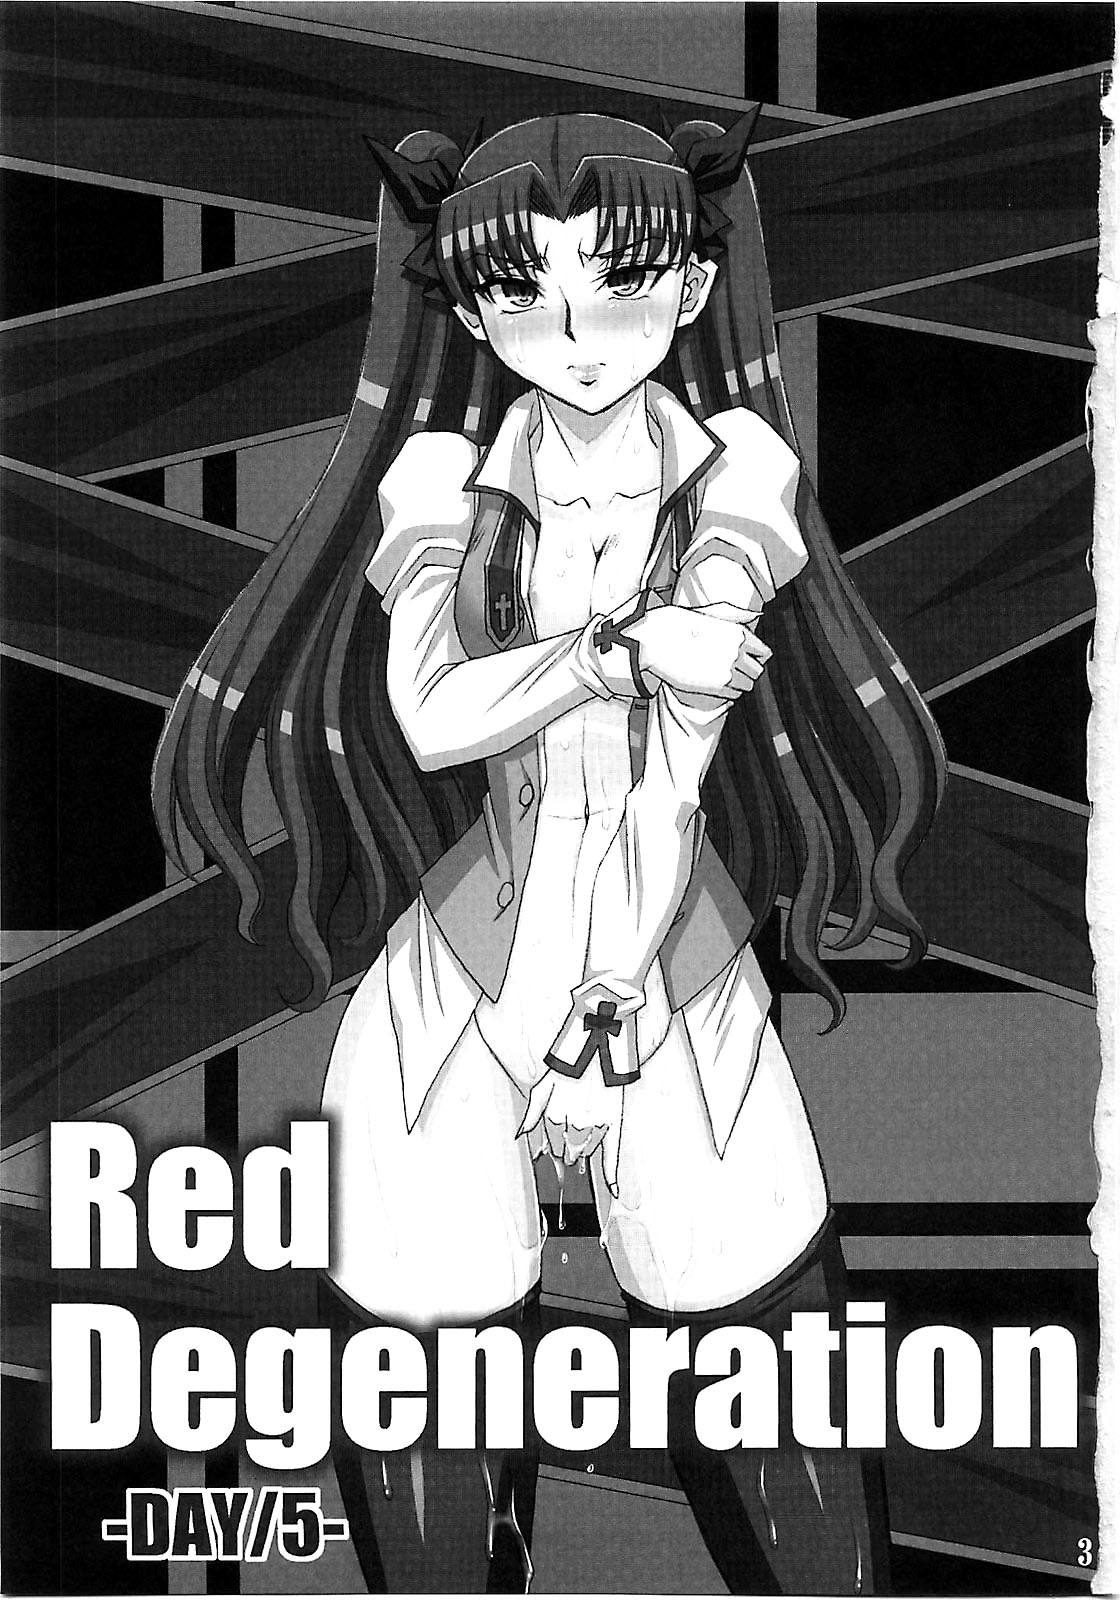 (C79) [H.B (B-RIVER)] Red Degeneration -DAY/5- (Fate/stay night) (C79) (同人誌) [H・B (B-RIVER)] Red Degeneration -DAY/5- (Fate/stay night)